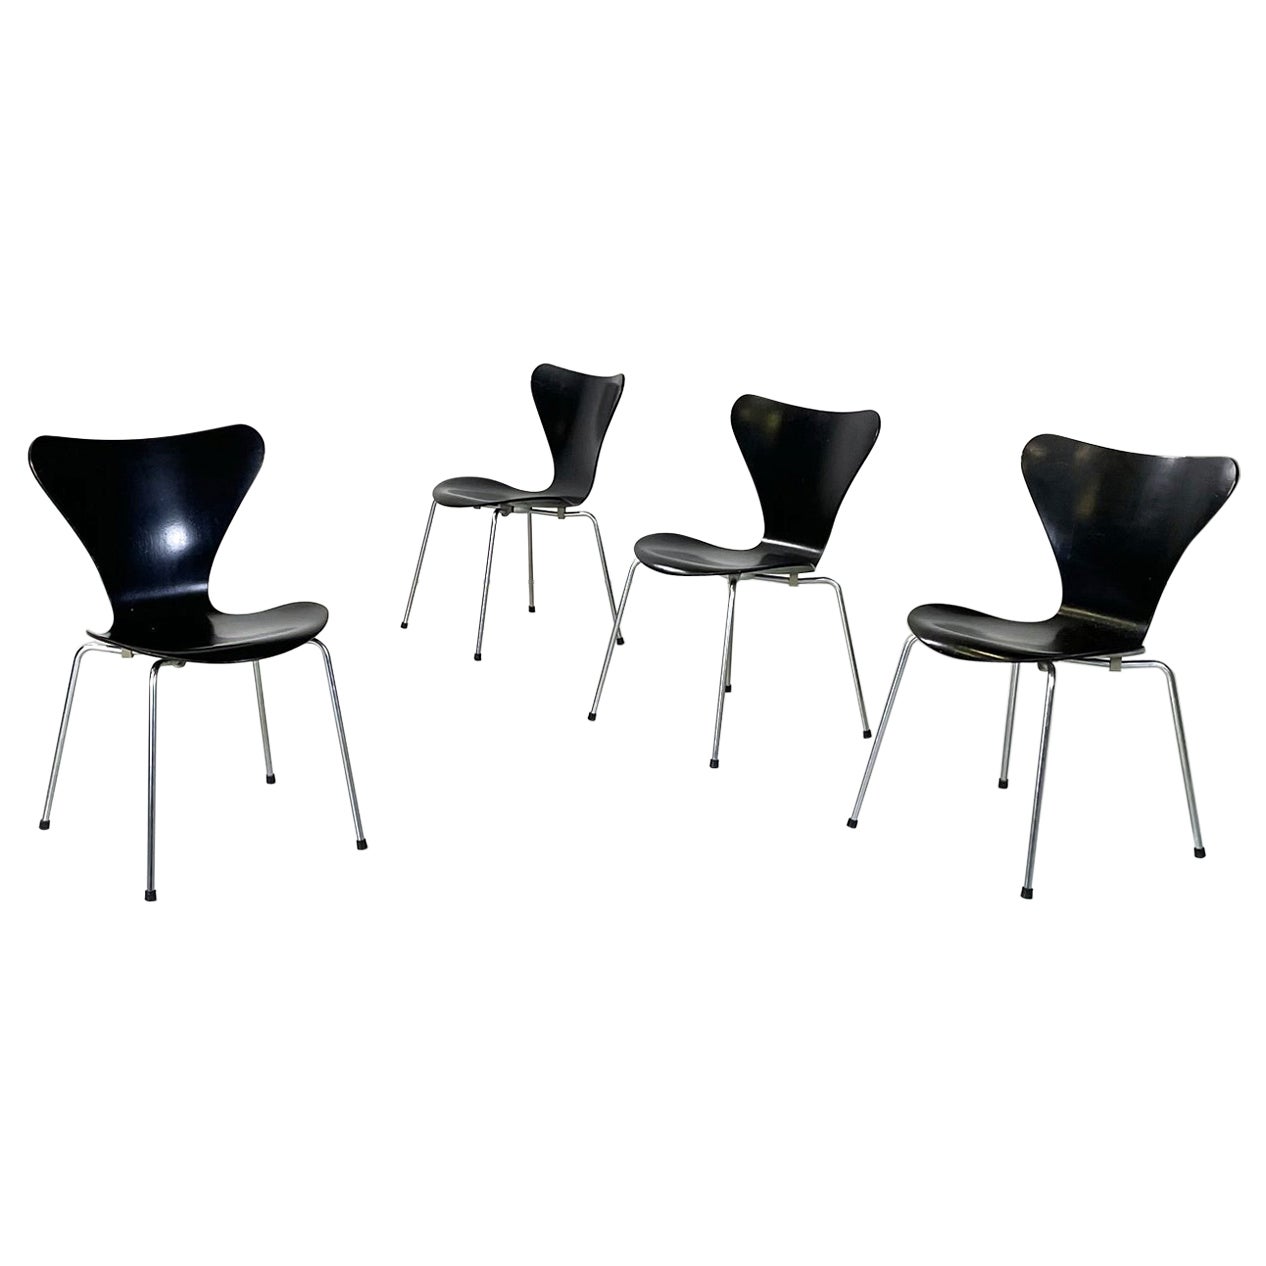 Danish modern Black wood Chairs 7 Series by Jacobsen for Fritz Hansen, 1970s For Sale